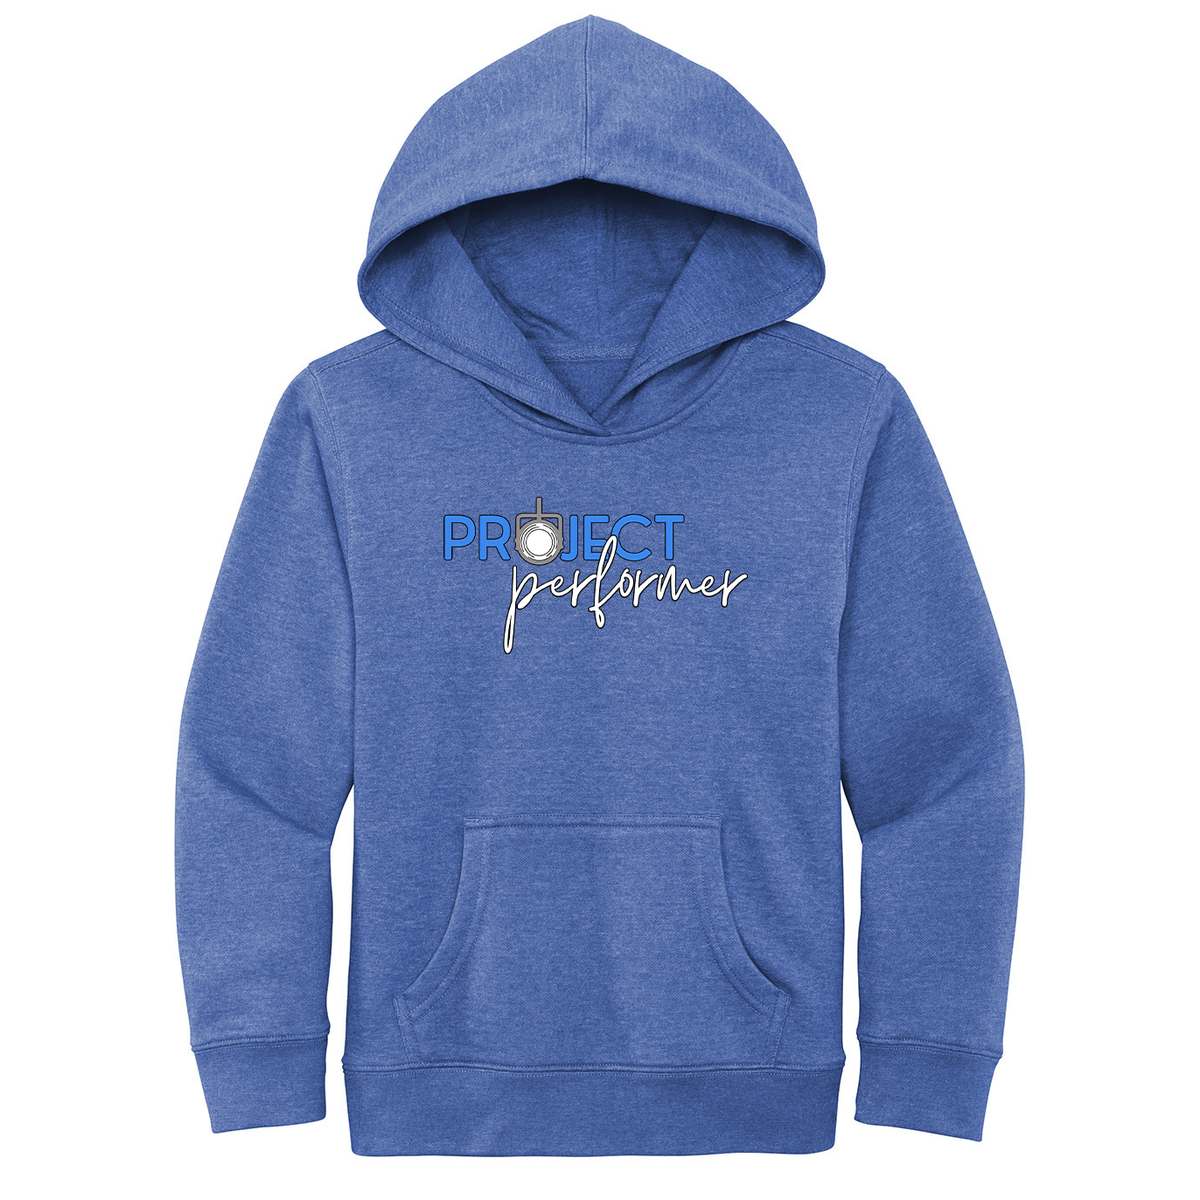 Project Performer Youth Fleece Hoodie